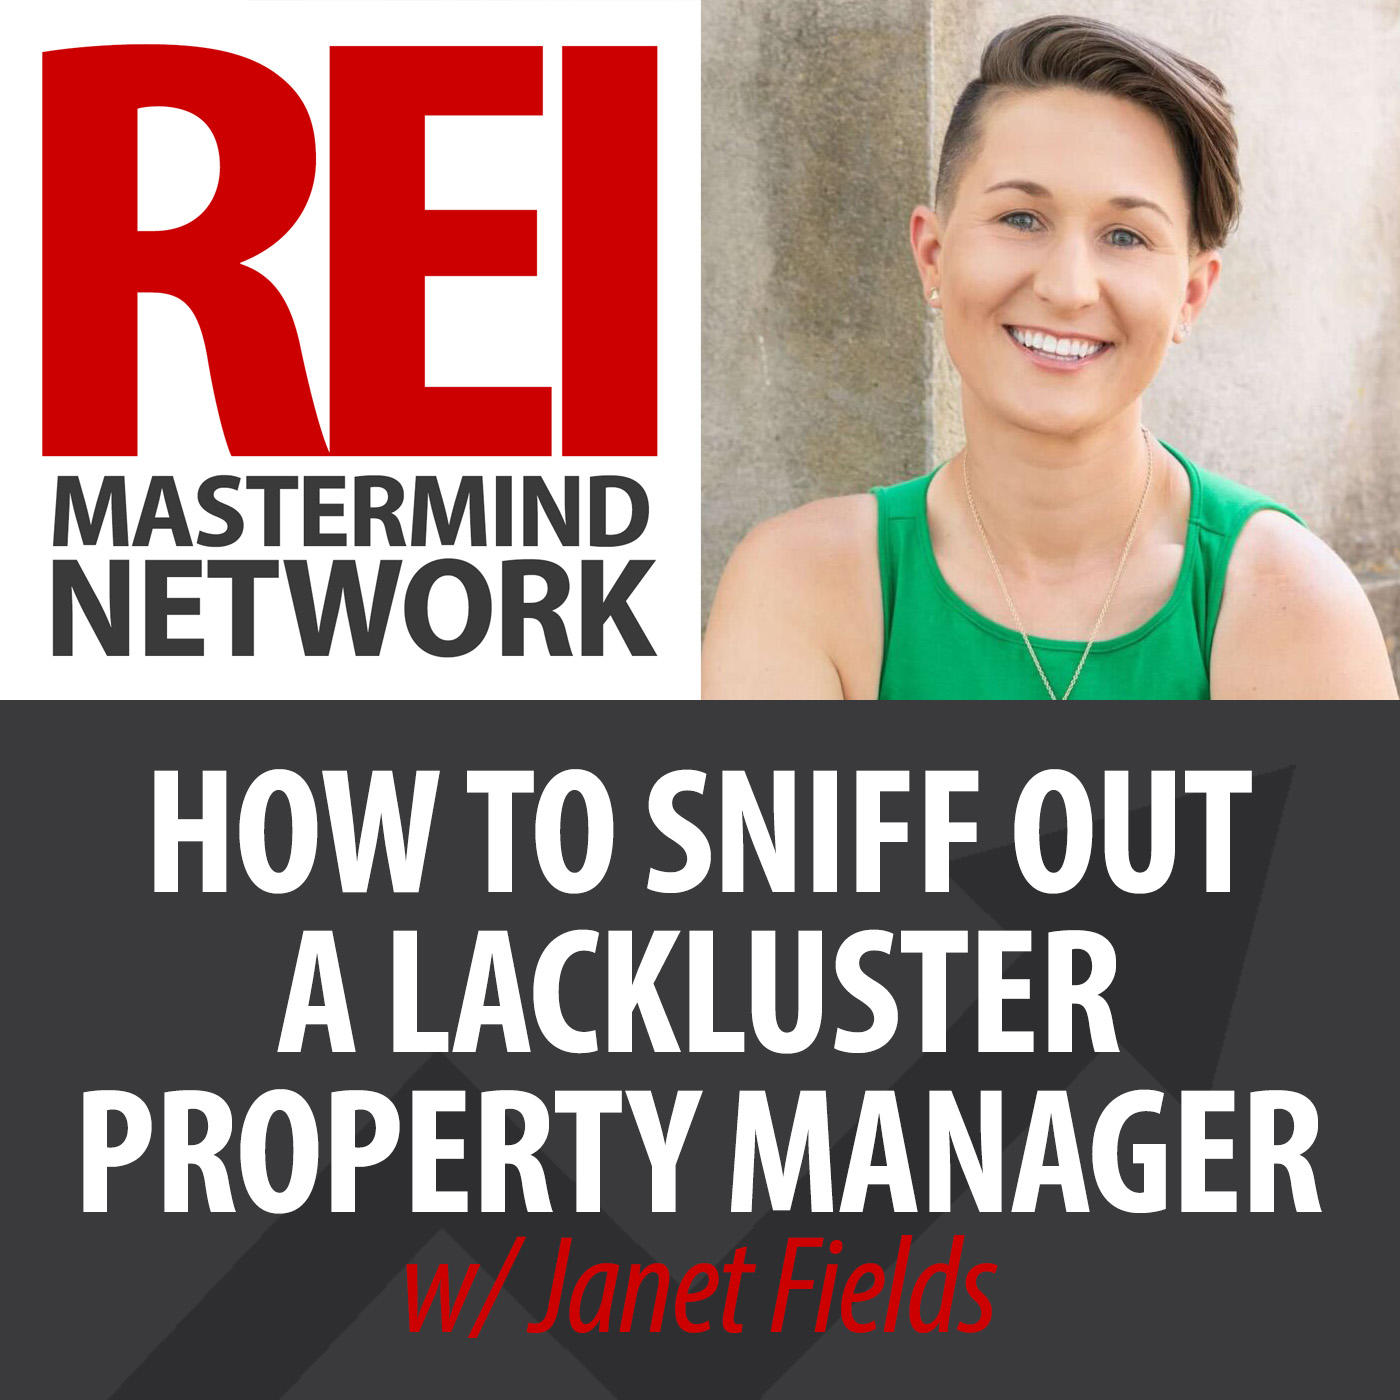 How to Sniff Out a Lackluster Property Manager with Janet Fields